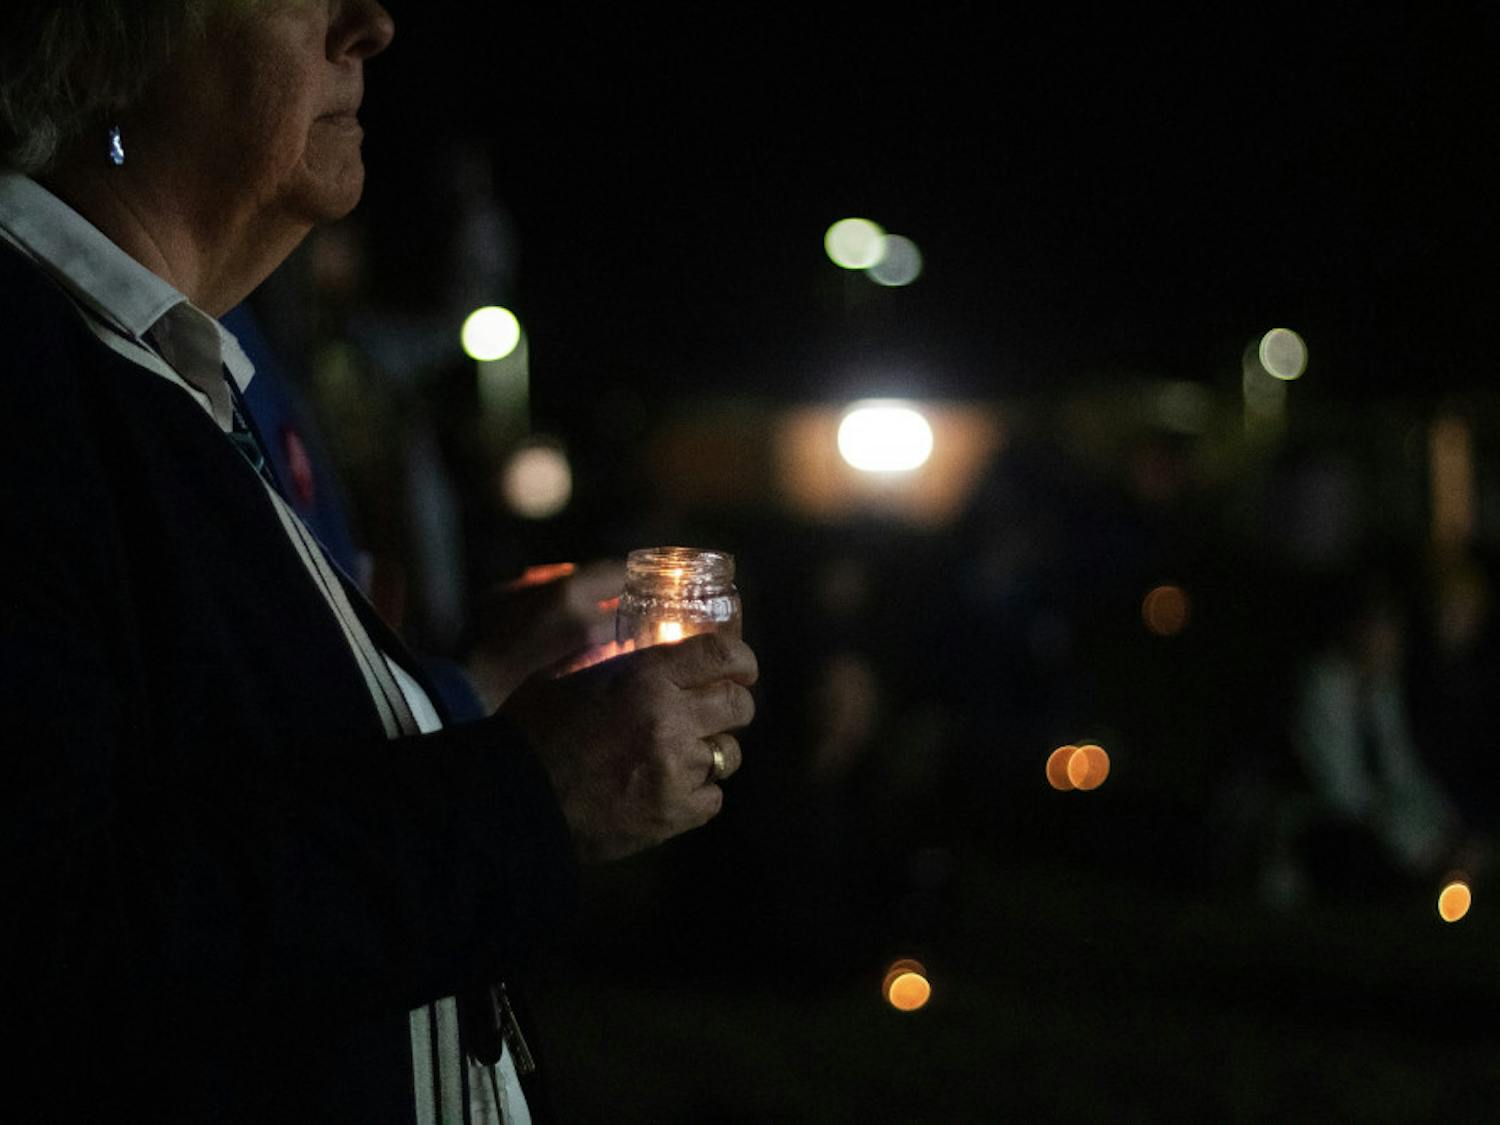 Flo Turcotte holds a candle for the vigil during the Transgender Day of Remembrance at Depot Park Wednesday night.